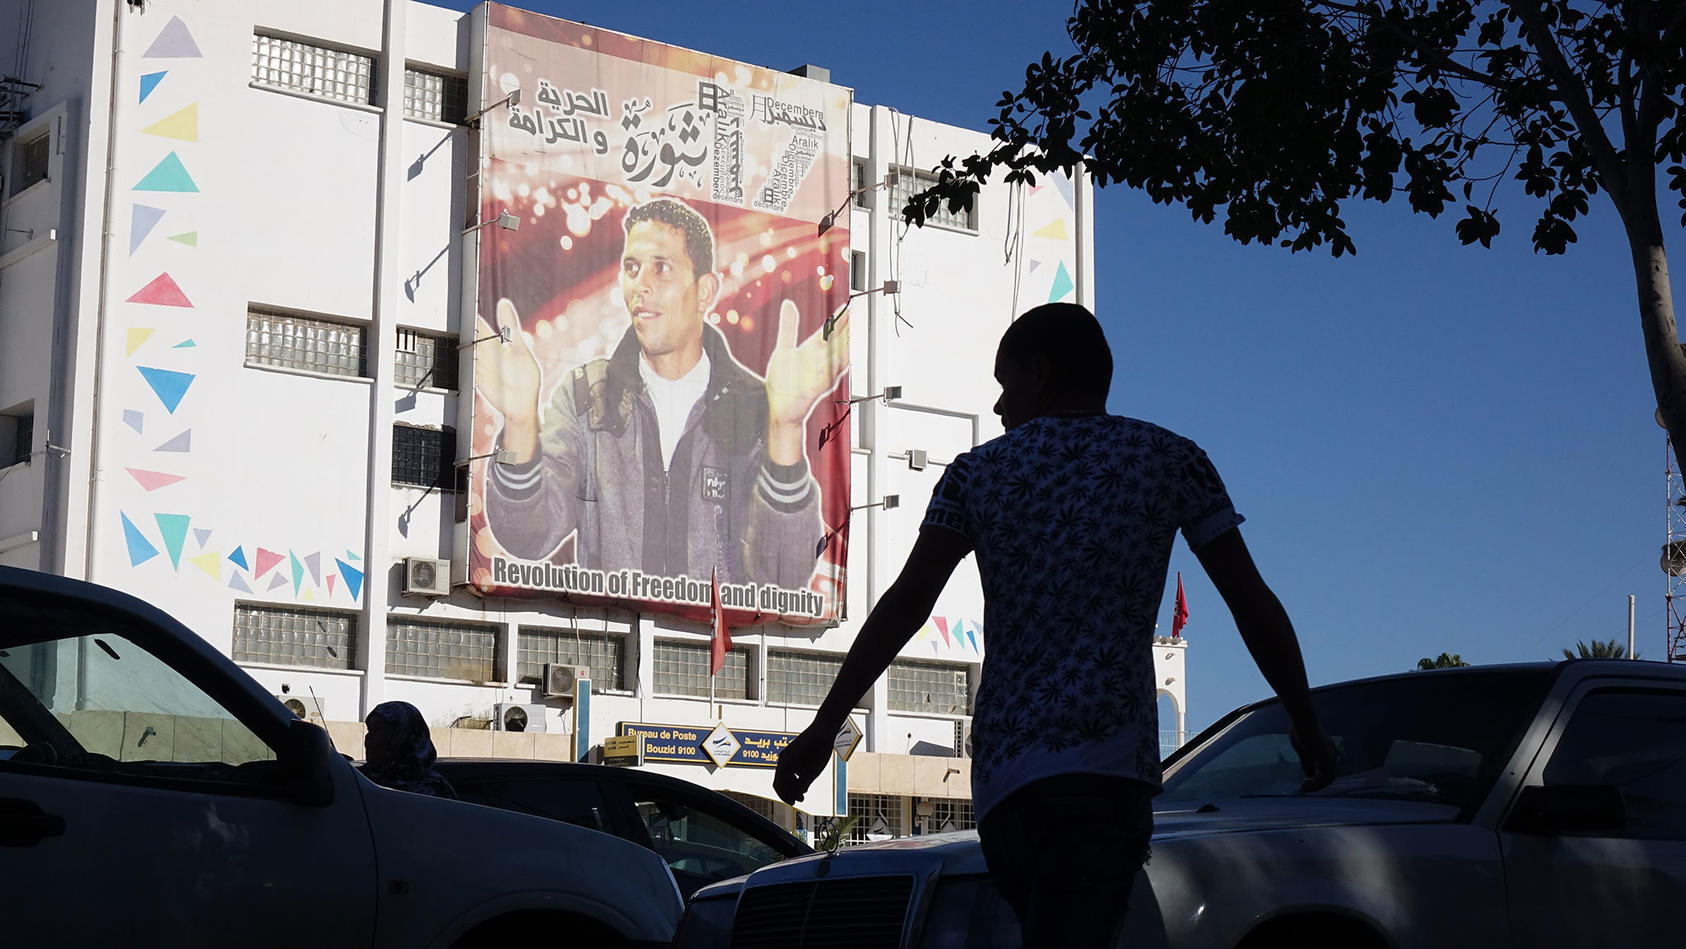 In the Tunisian city of Sidi Bouzid, cars and pedestrians bustle past the post office, with its portrait of street vendor Mohammed Bouazizi, whom Tunisians describe as a martyr to their democracy. 